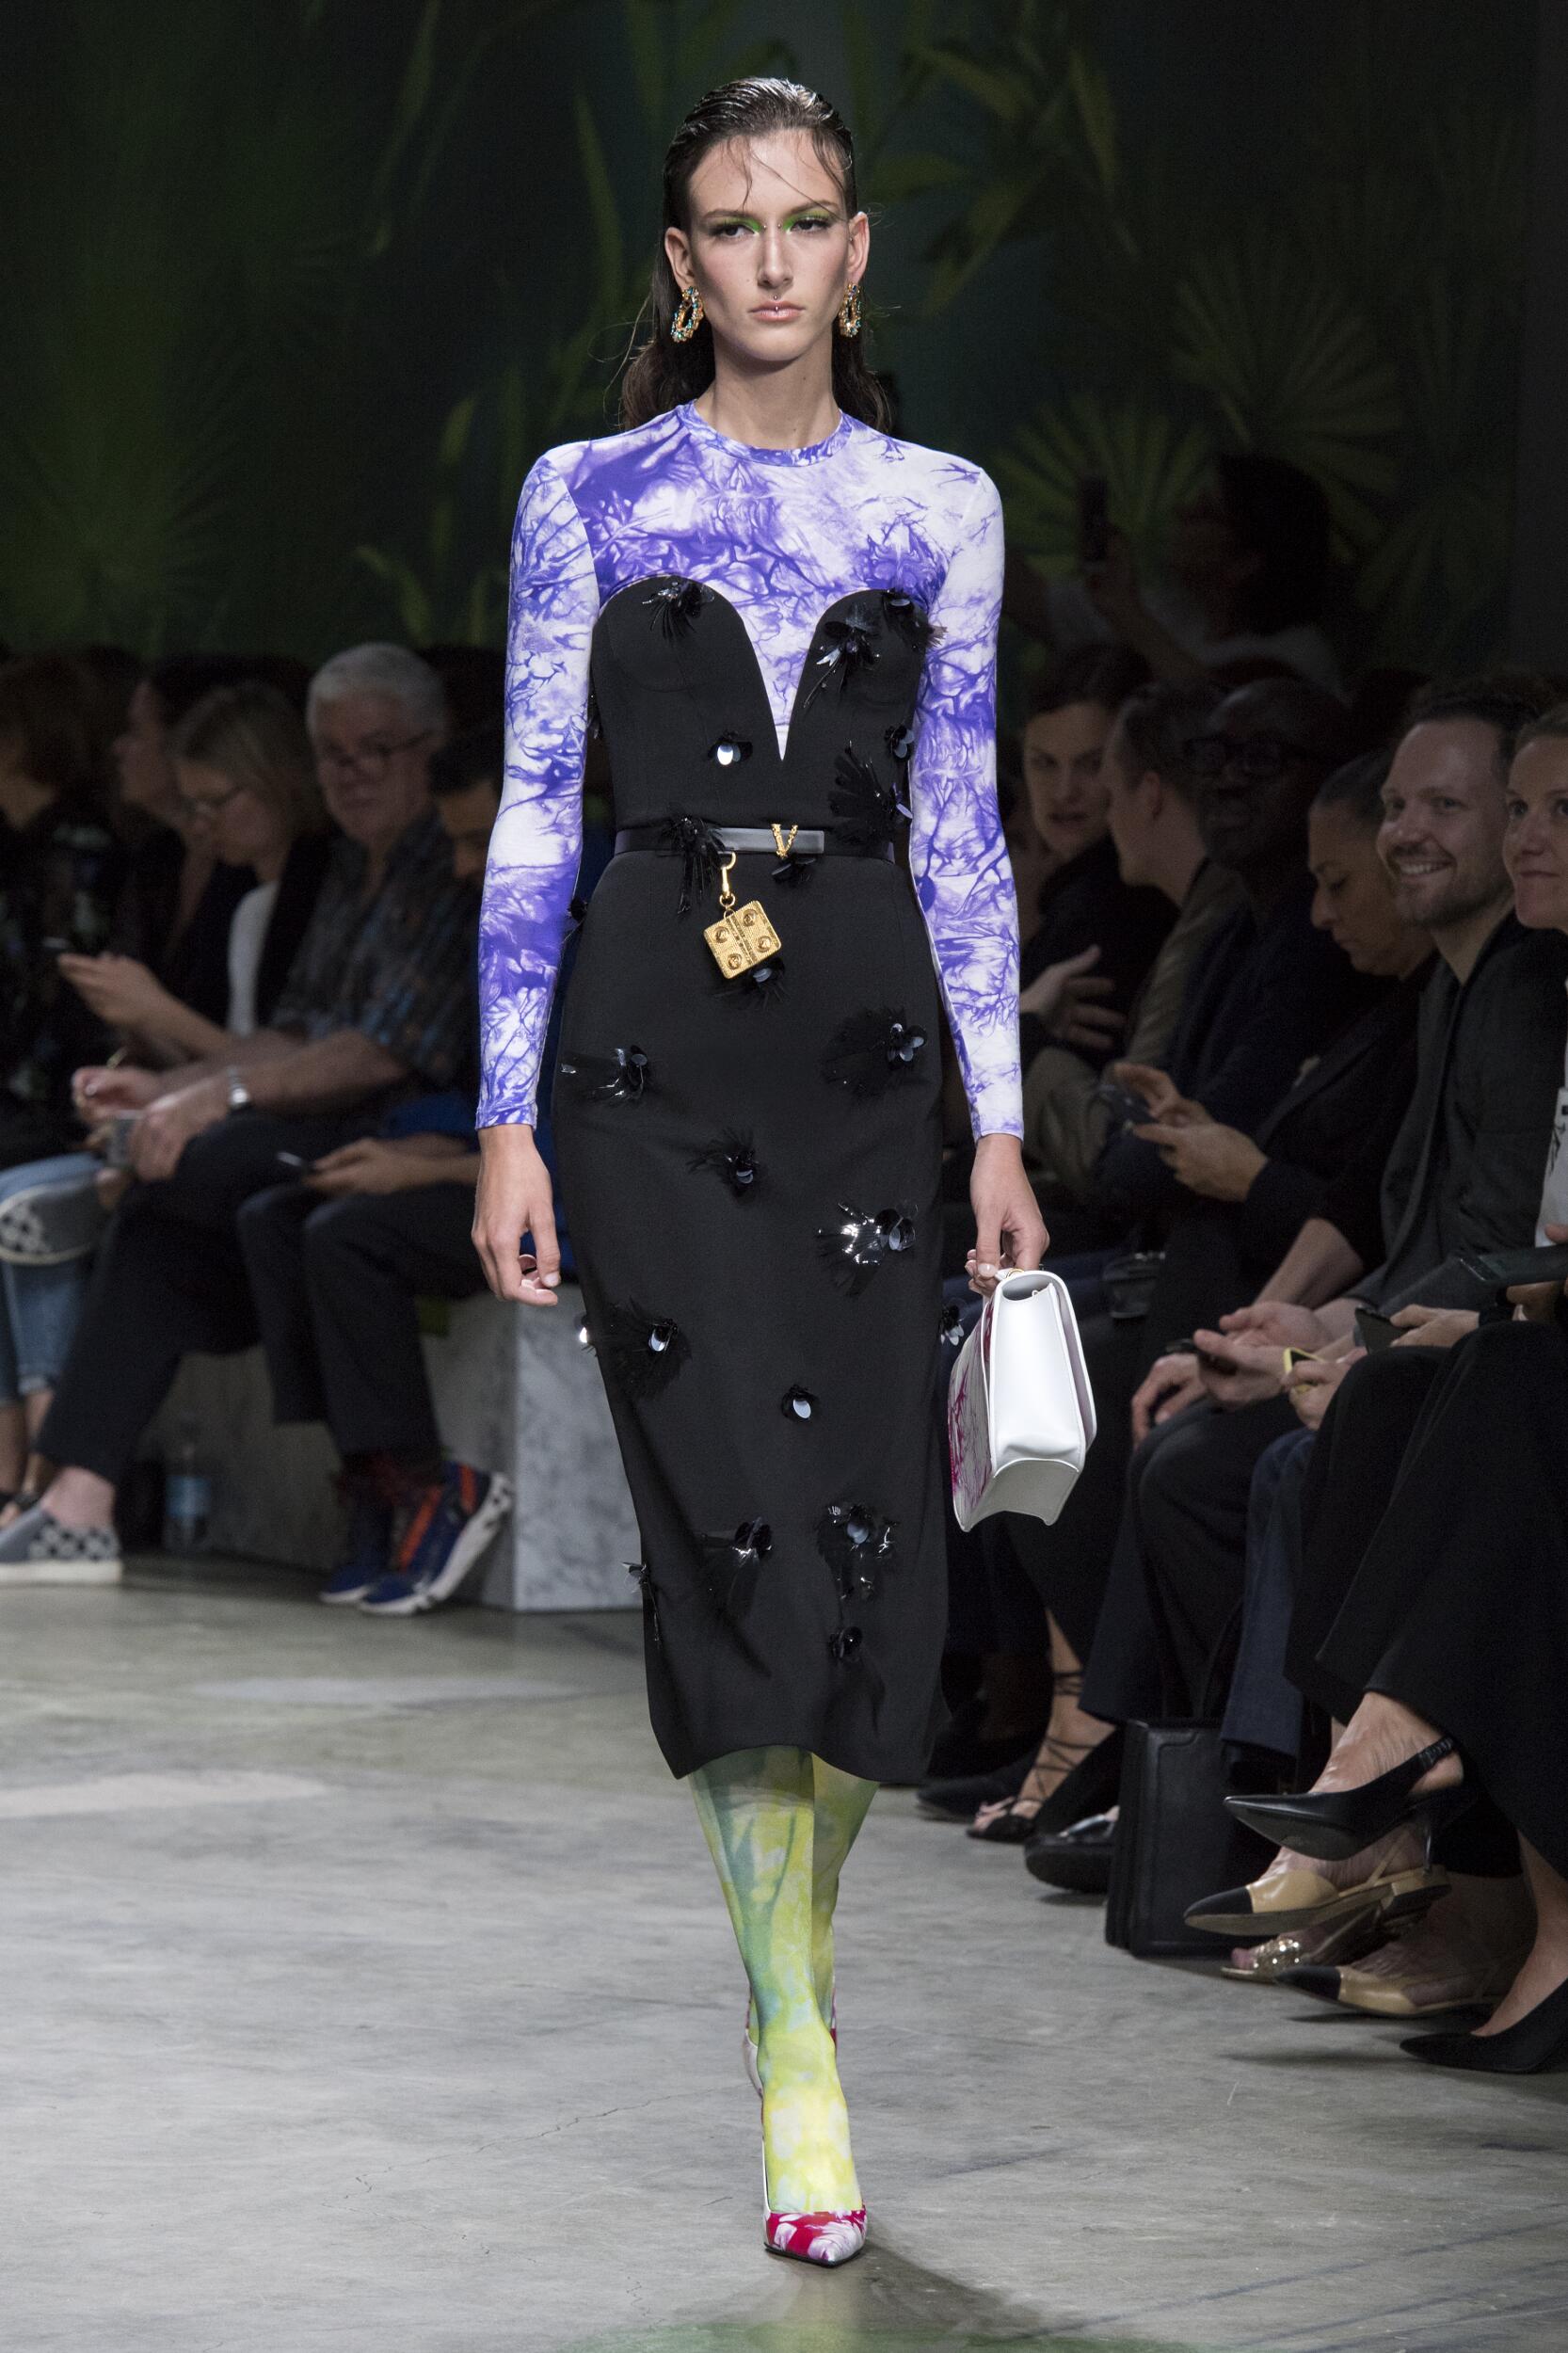 VERSACE SPRING SUMMER 2020 WOMEN'S COLLECTION